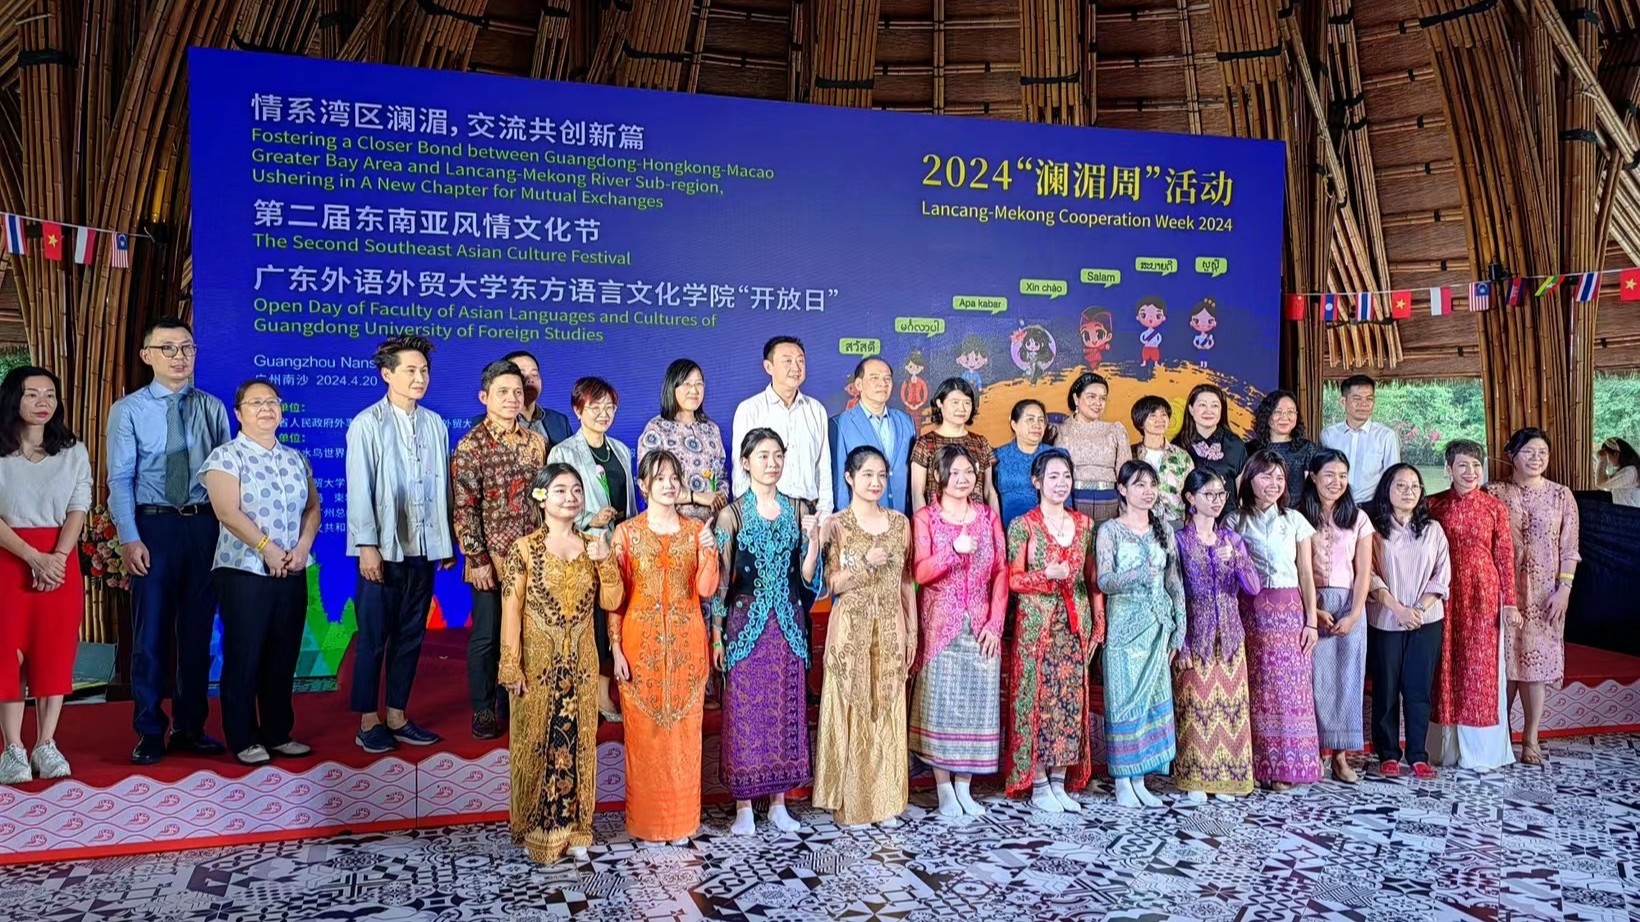 Lancang-Mekong Cooperation Week 2024 promotes closer cultural exchange and cooperation